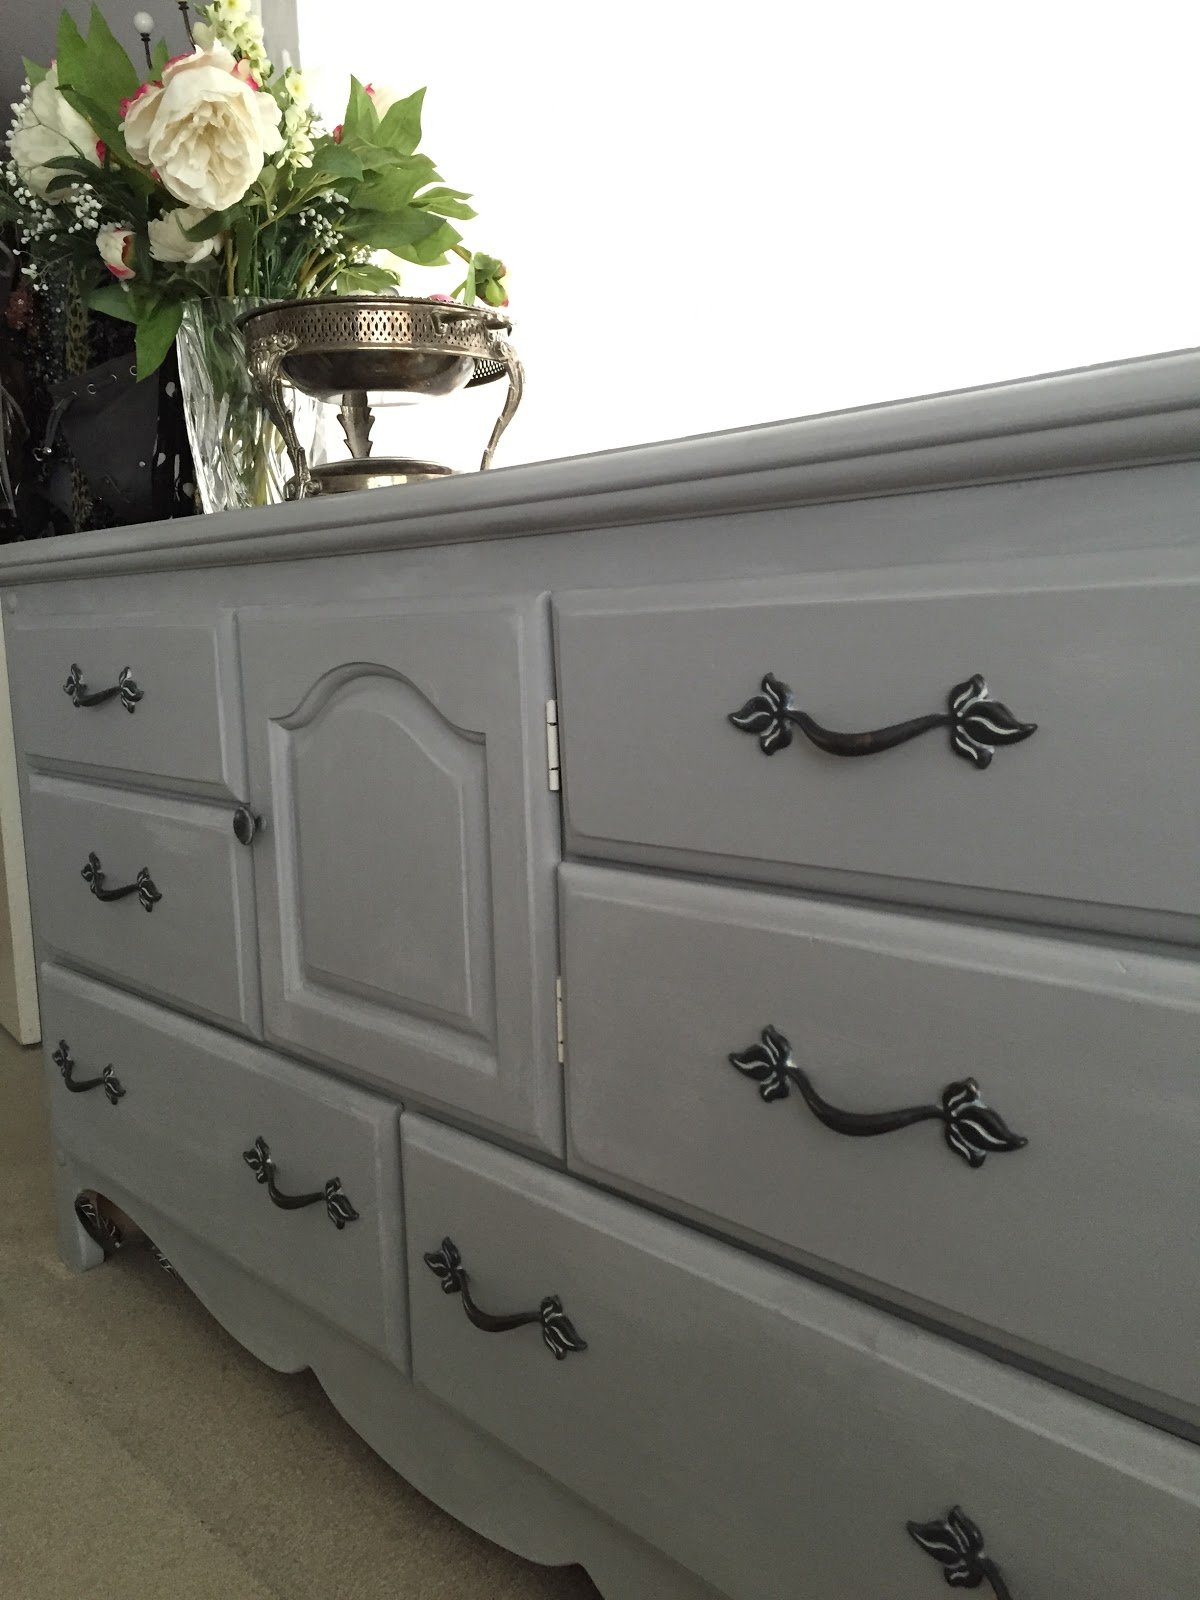 How To Chalk Paint A Dresser With Annie Sloan Paris Grey The